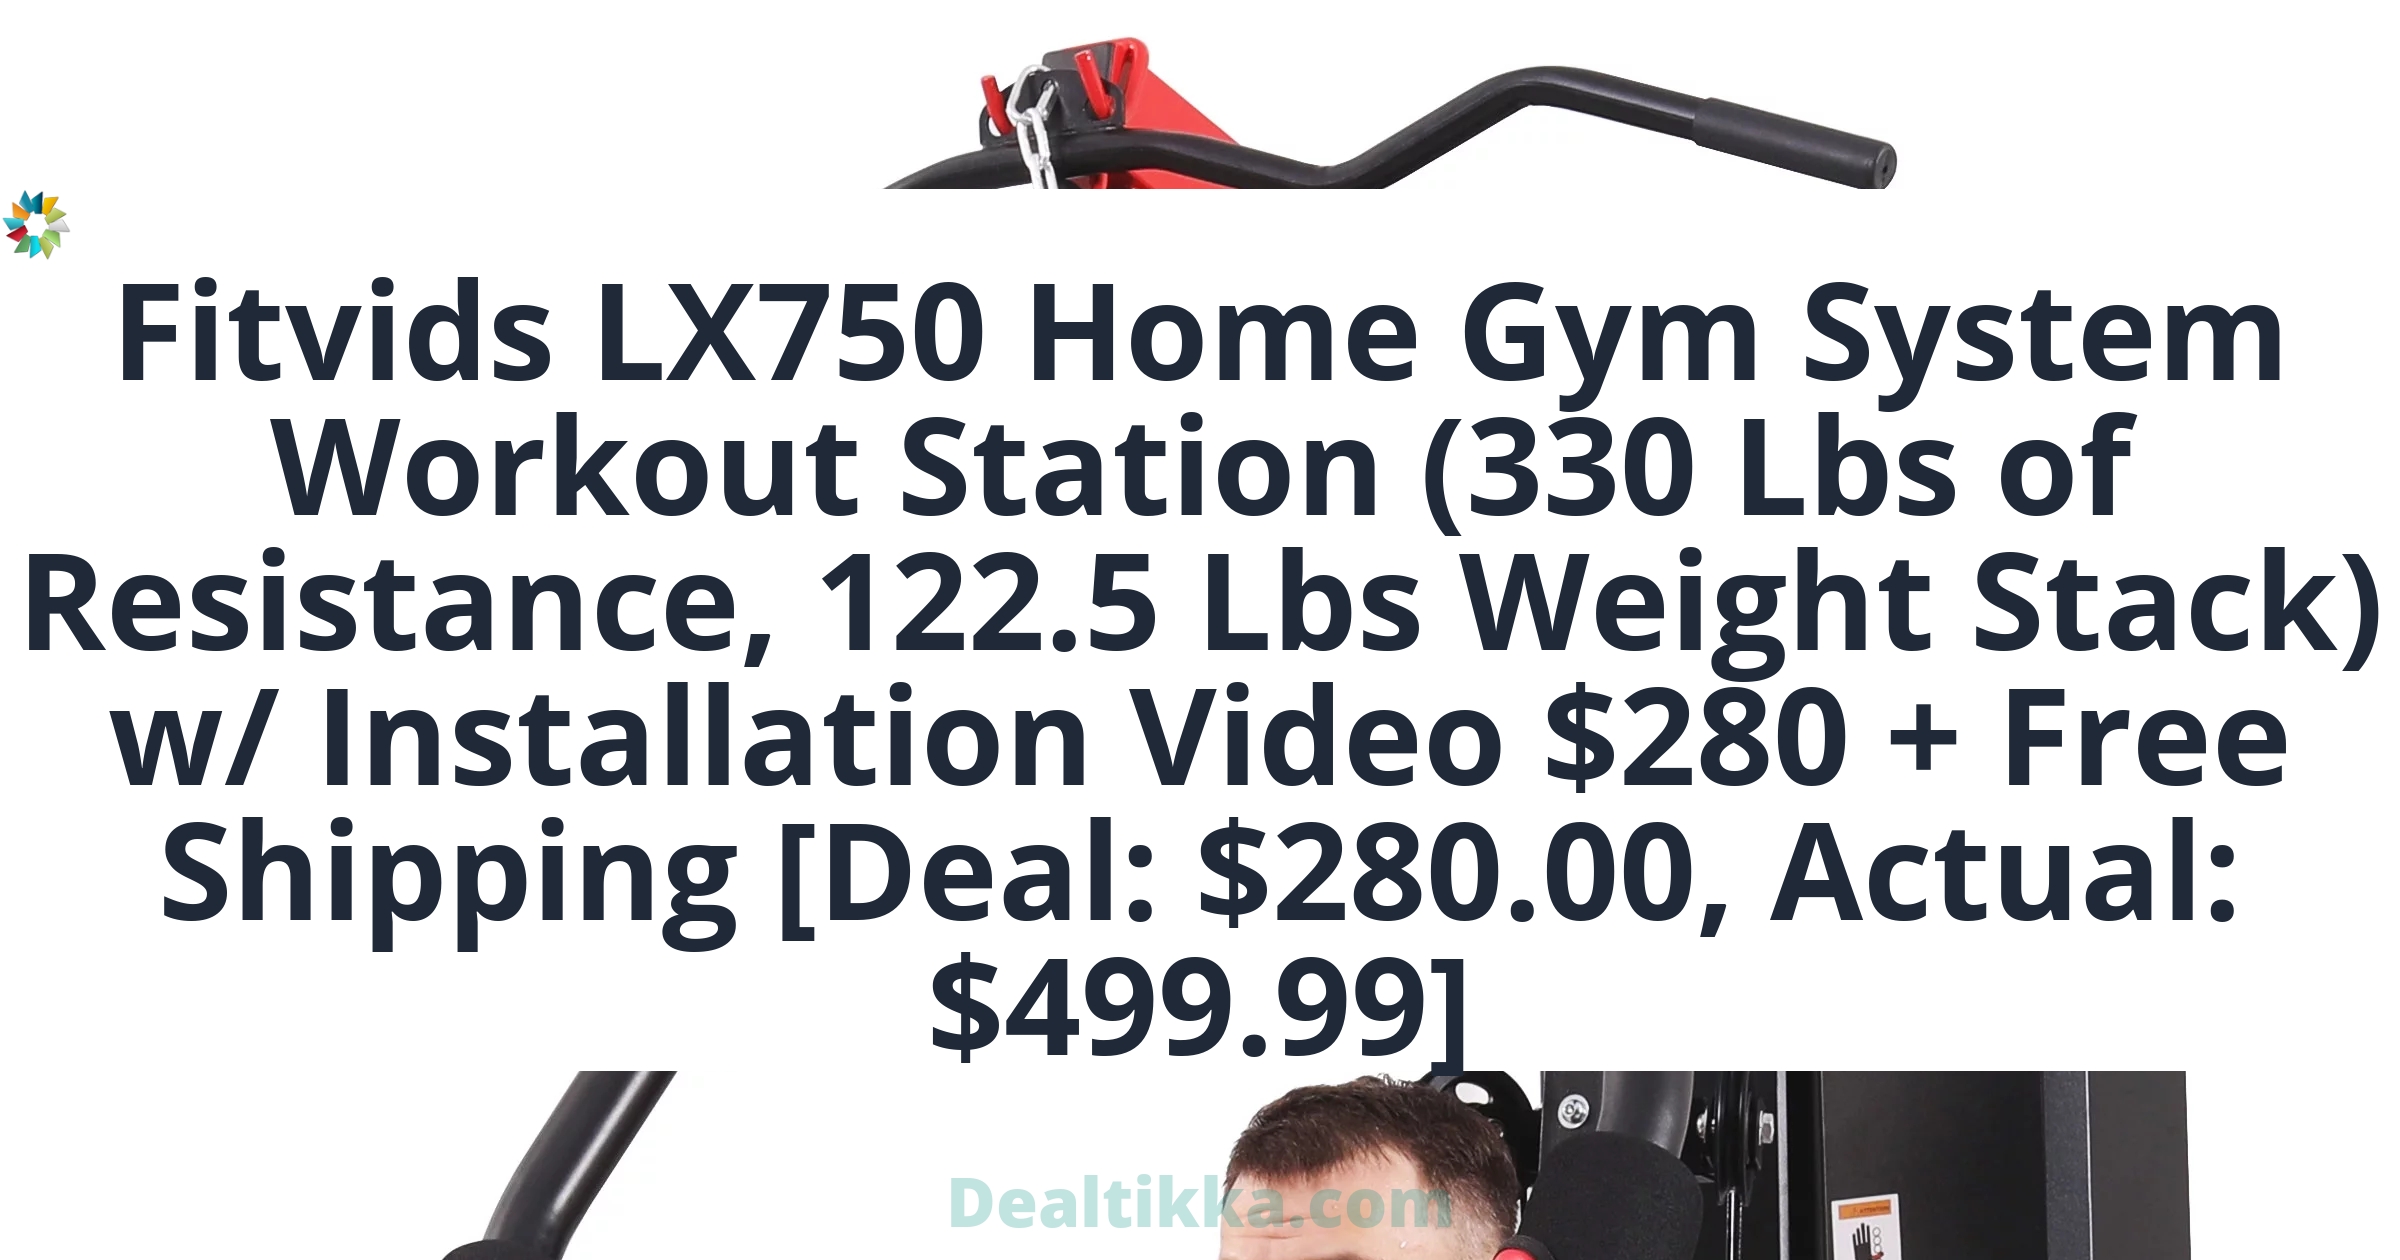 Fitvids-LX750-Home-Gym-System-Workout-Station-330-Lbs-Resistance-122-5-Weight-Stack-One-Station-Comes-Installation-Instruction-Video-Ships-5-Boxes_37c9016a-7df4-4cd0-a7d6-5a306314b2a0.31224581ceaed791c4dac8e389b05e29.jpeg&bgTailwind=bg-blueGray-200&footer=Dealtikka.com&footerTailwind=text-teal-600%20font-black%20opacity-25%20text-3xl&containerTailwind=bg-white&t=1717382698576&refresh=1